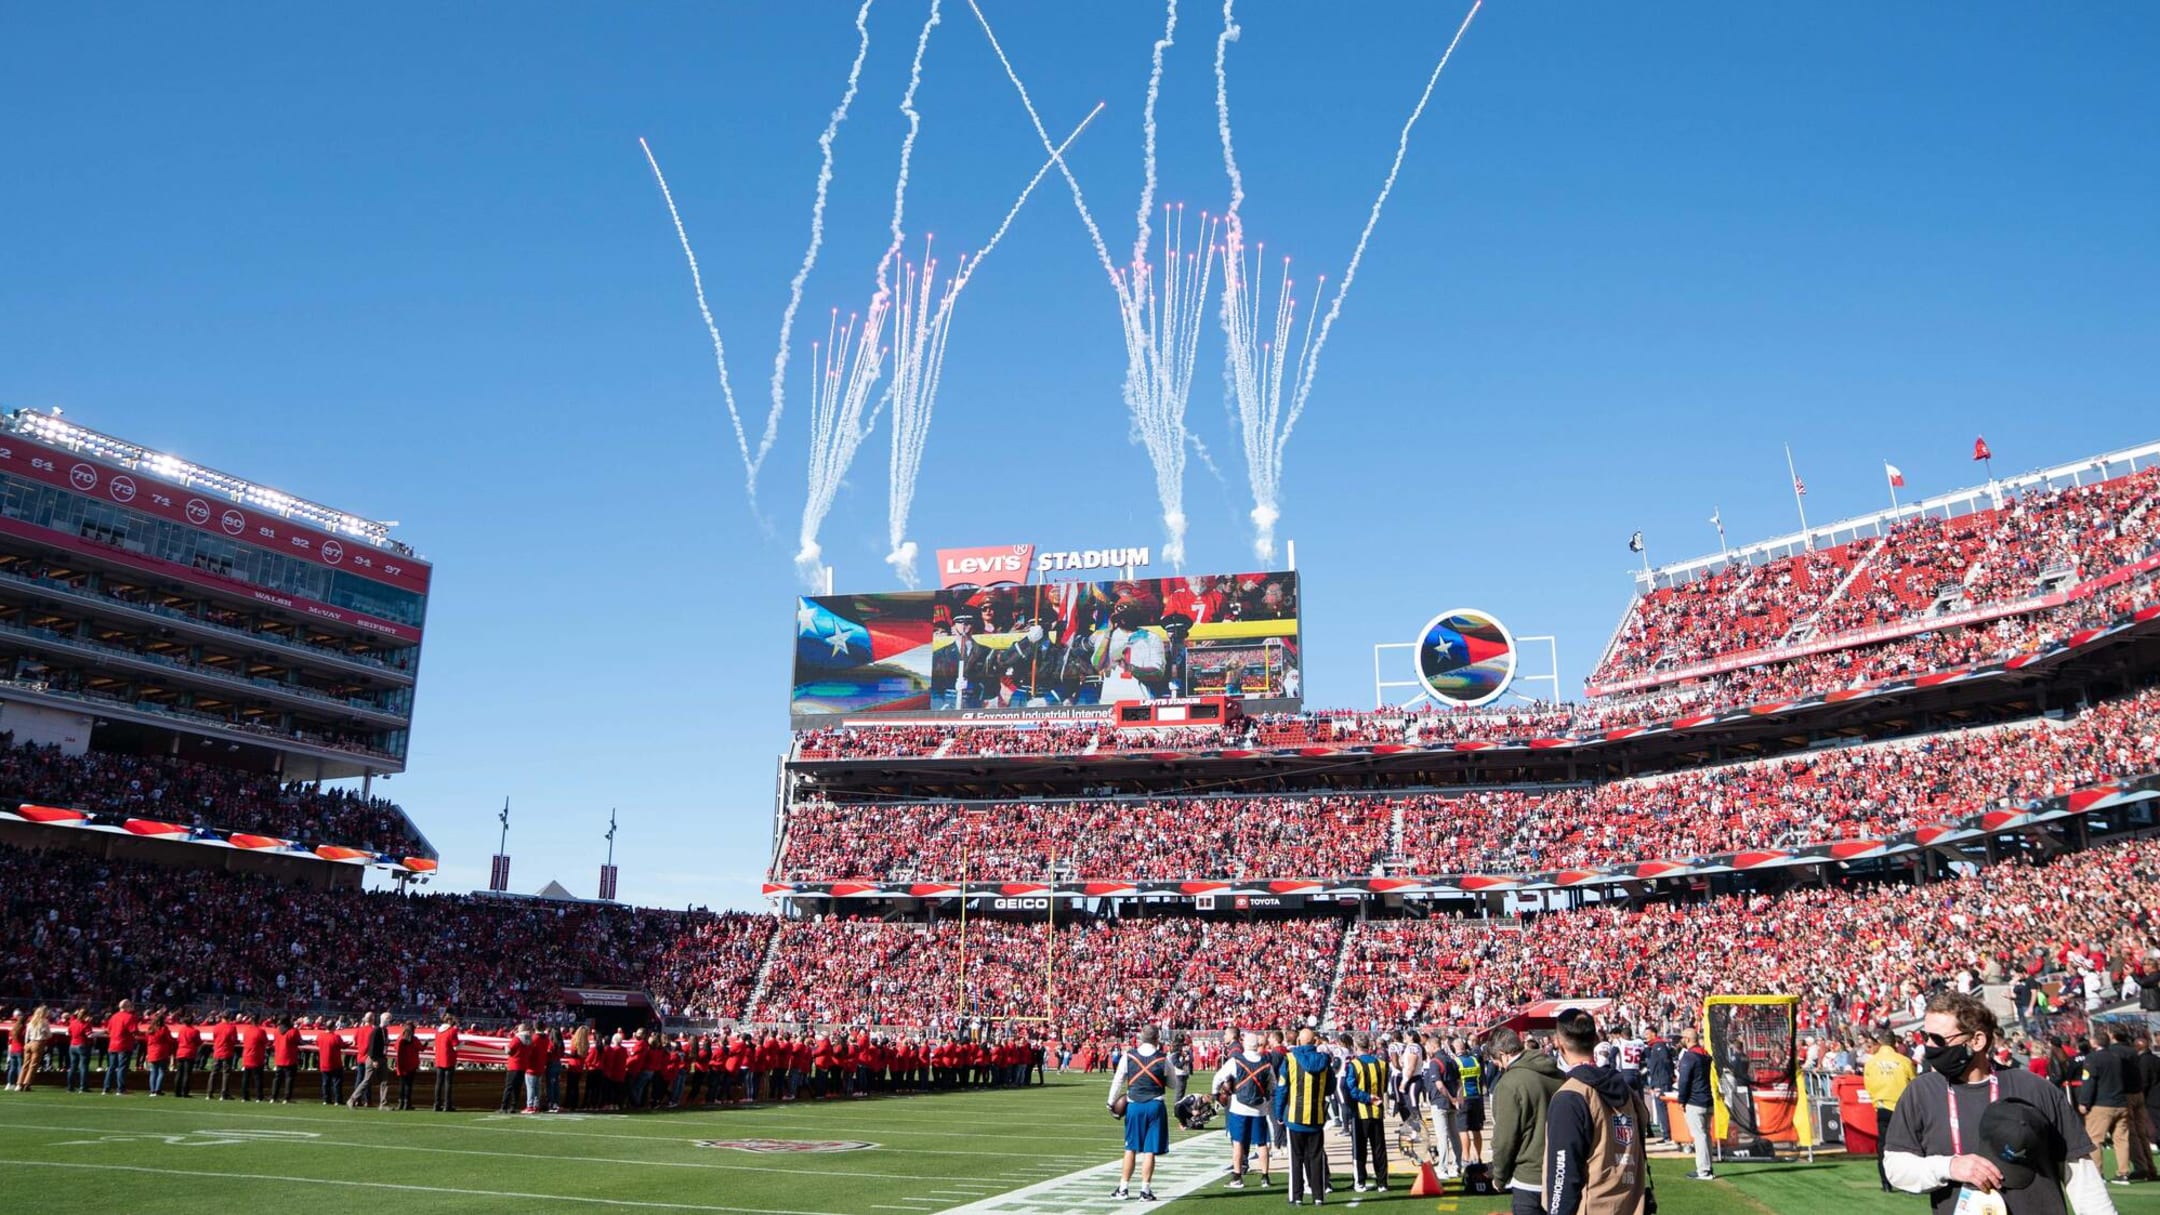 49ers fans TOOK OVER the Rams Stadium and painted it red 